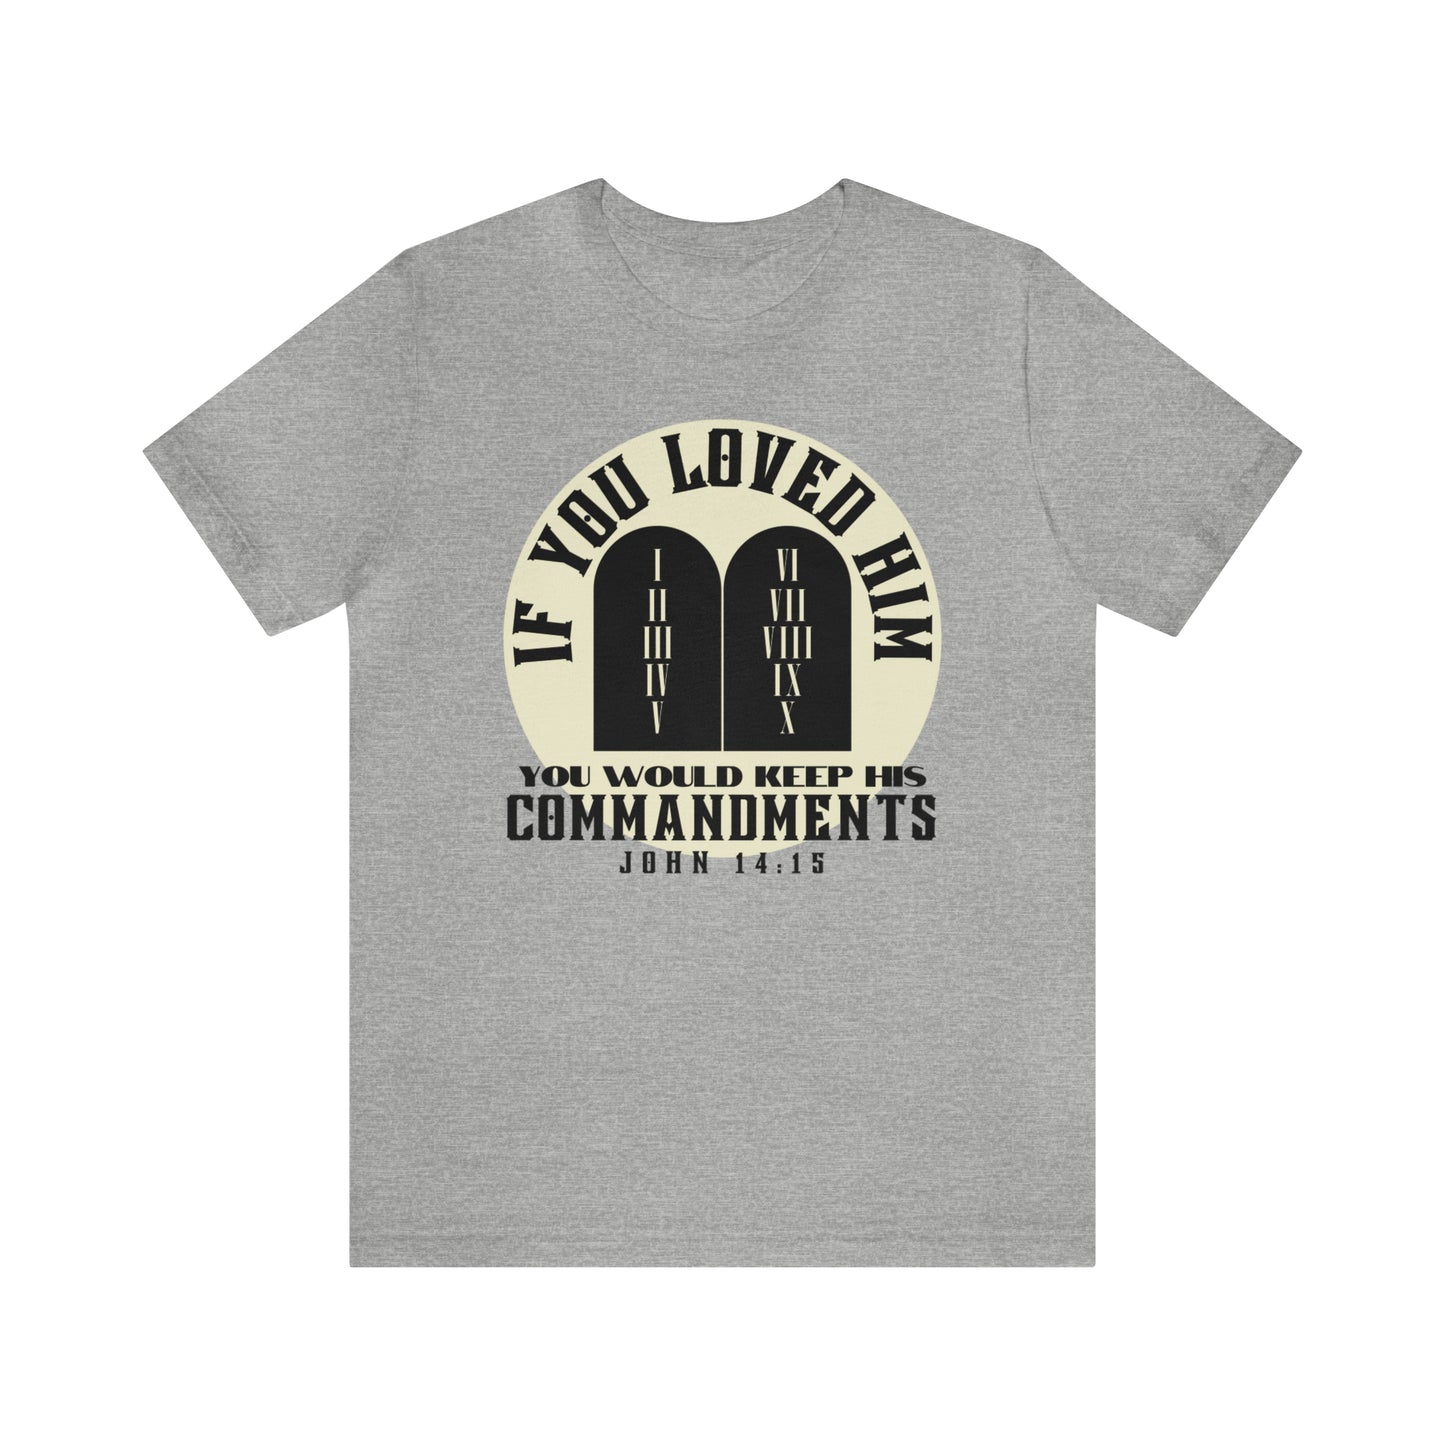 If You Loved Him You Would Keep His Commandments (Green Pastures Apparel)